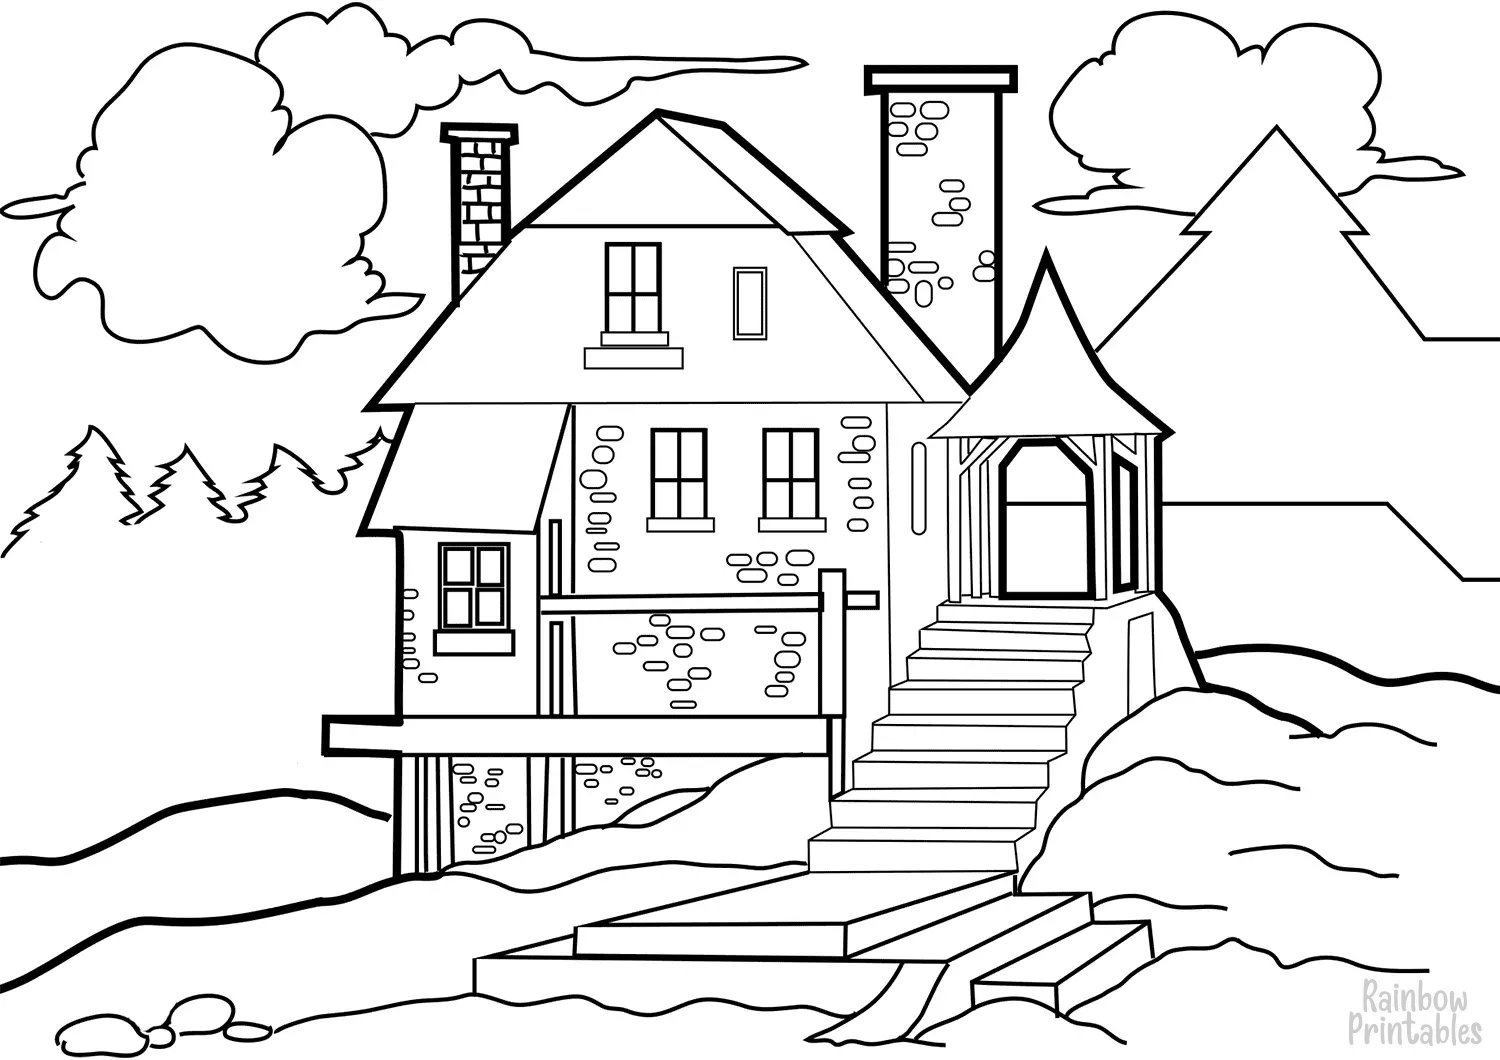 Coloring-Activity-house-in-the-wilderness-coloring-page for Kids